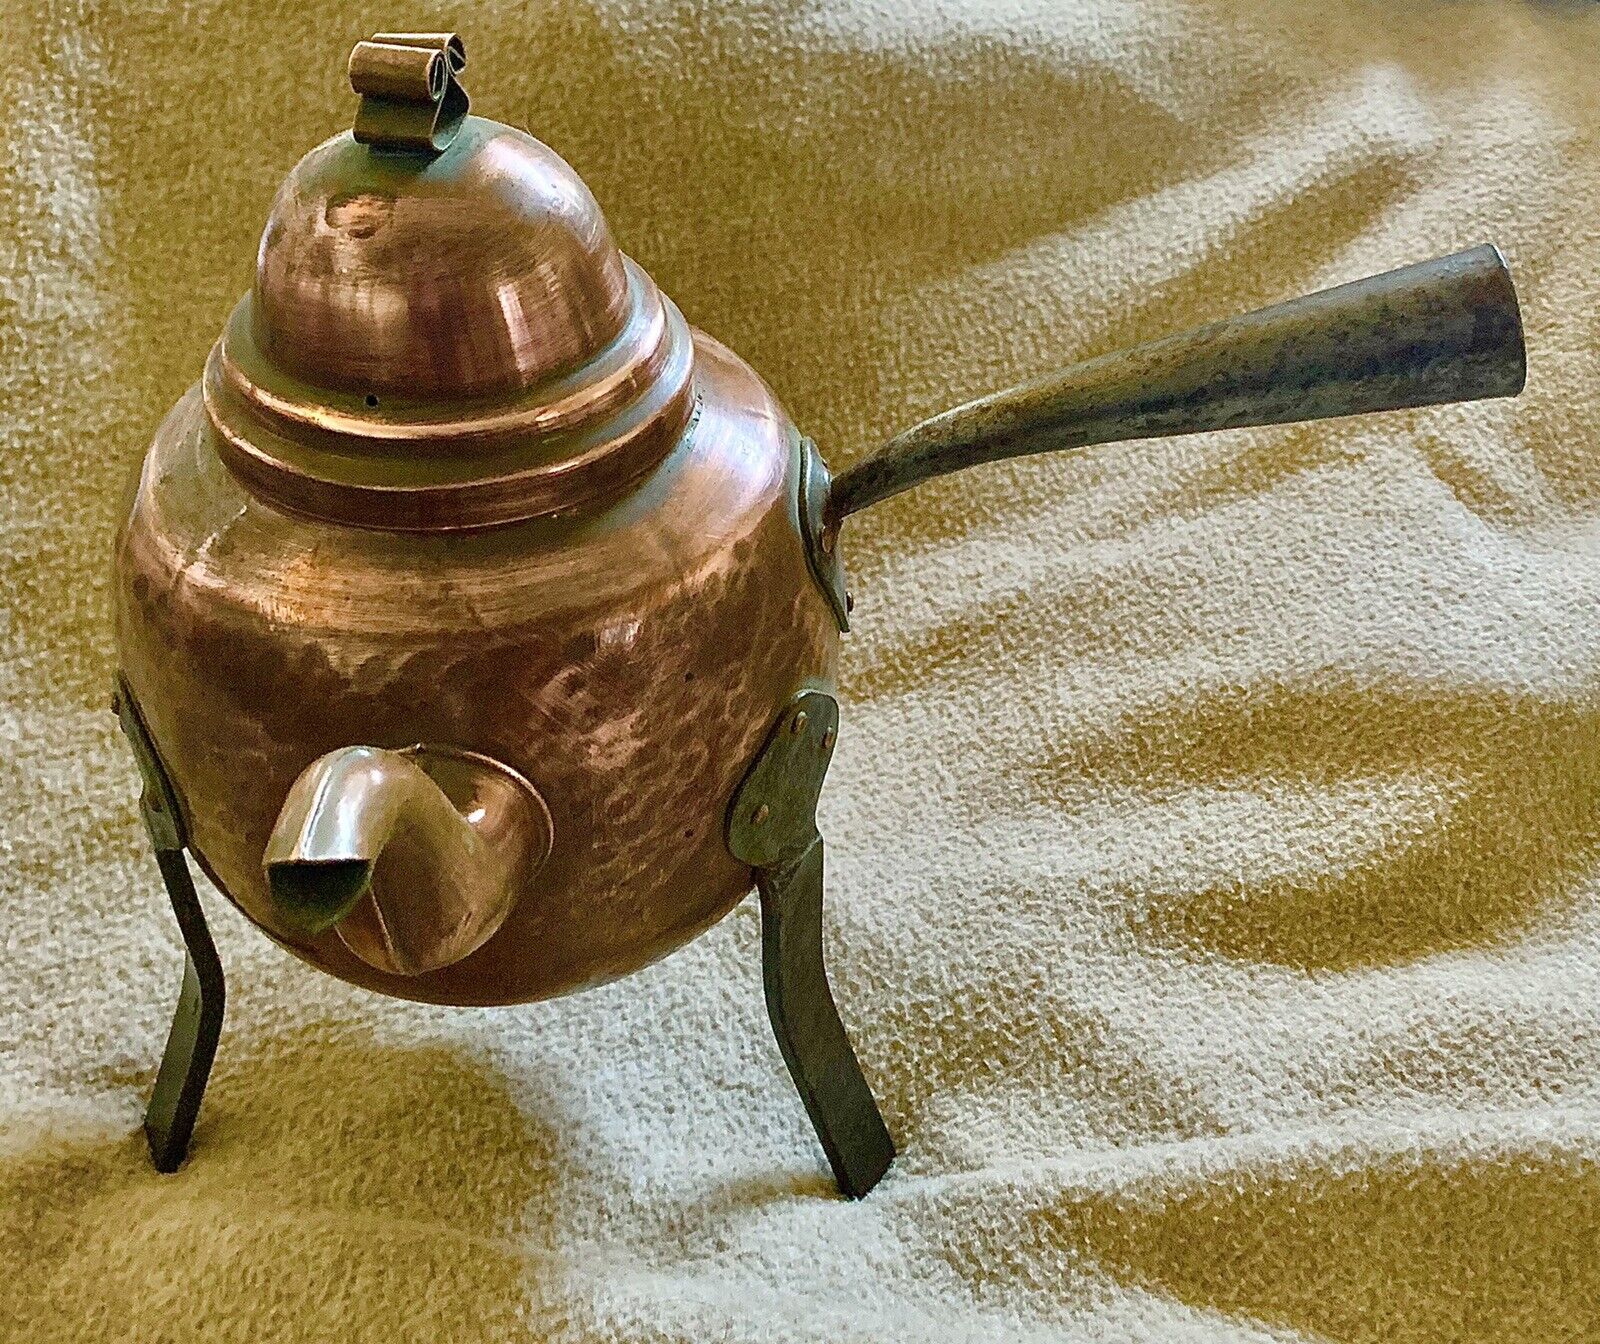 Antique European handmade copper and wrought iron coffee pot